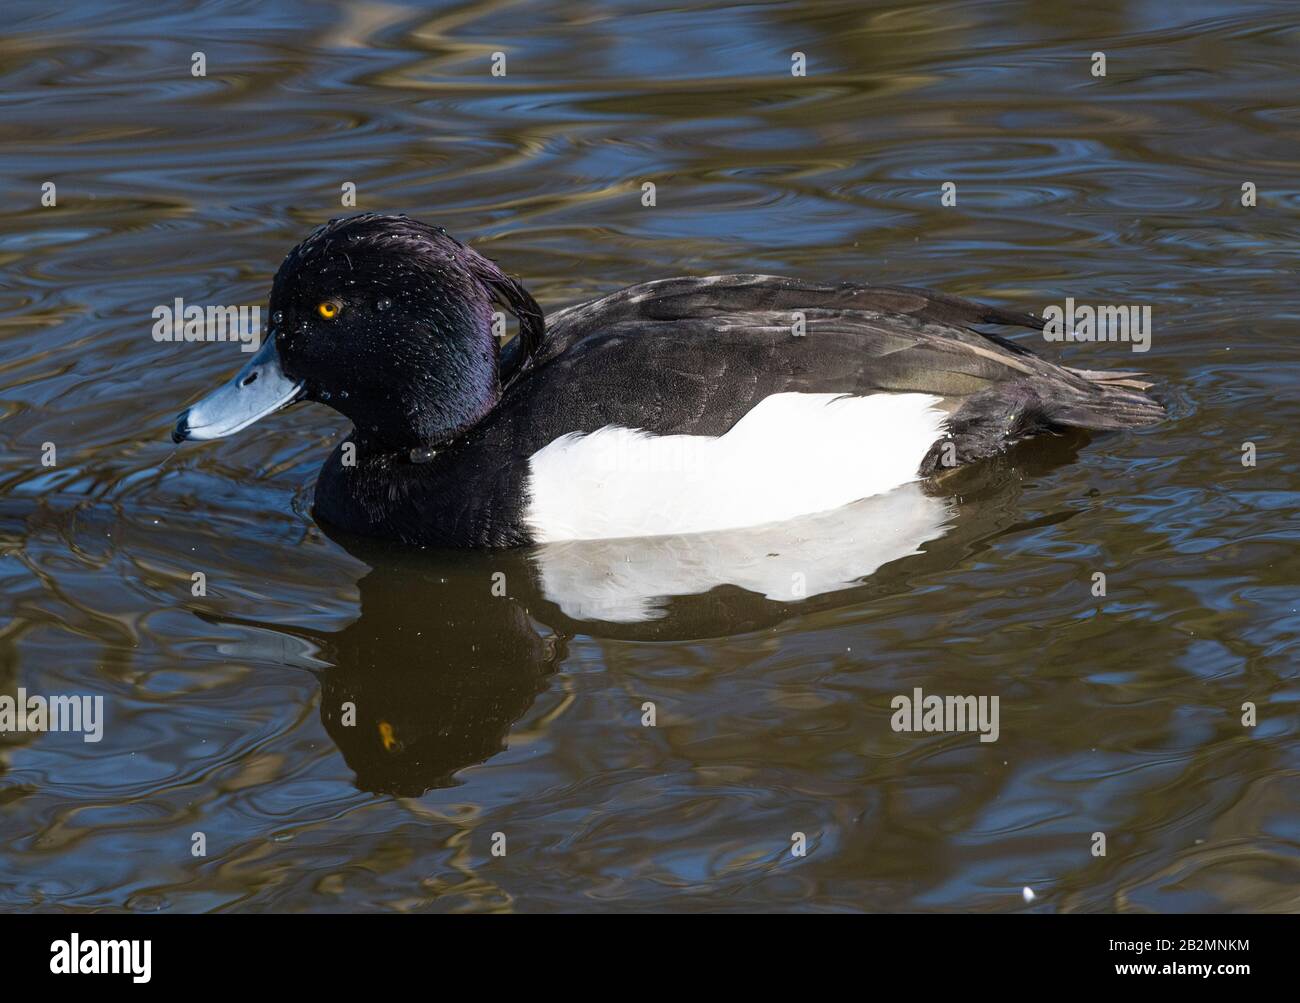 A Beautiful Male Tufted Duck Swimming on a Lake at Martin Mere Wetland Centre near Ormskirk Lancashire England United Kingdom UK Stock Photo